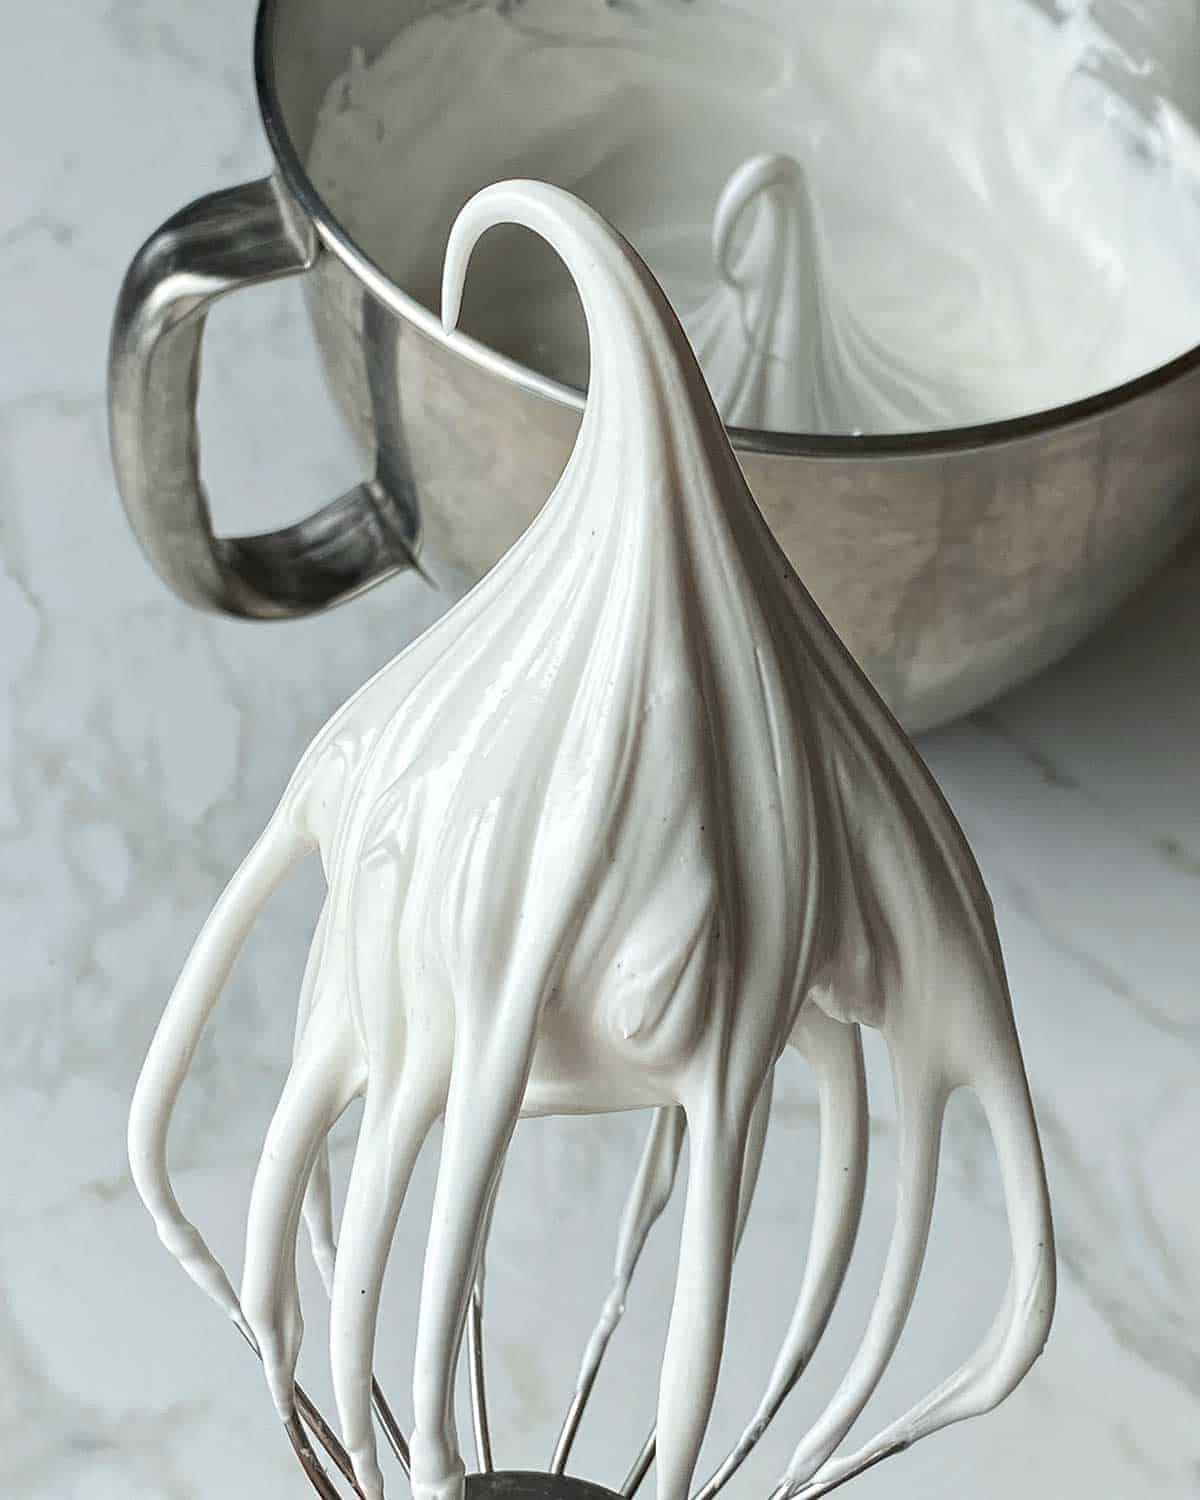 Whipped egg white on the end of a whisk attachment.